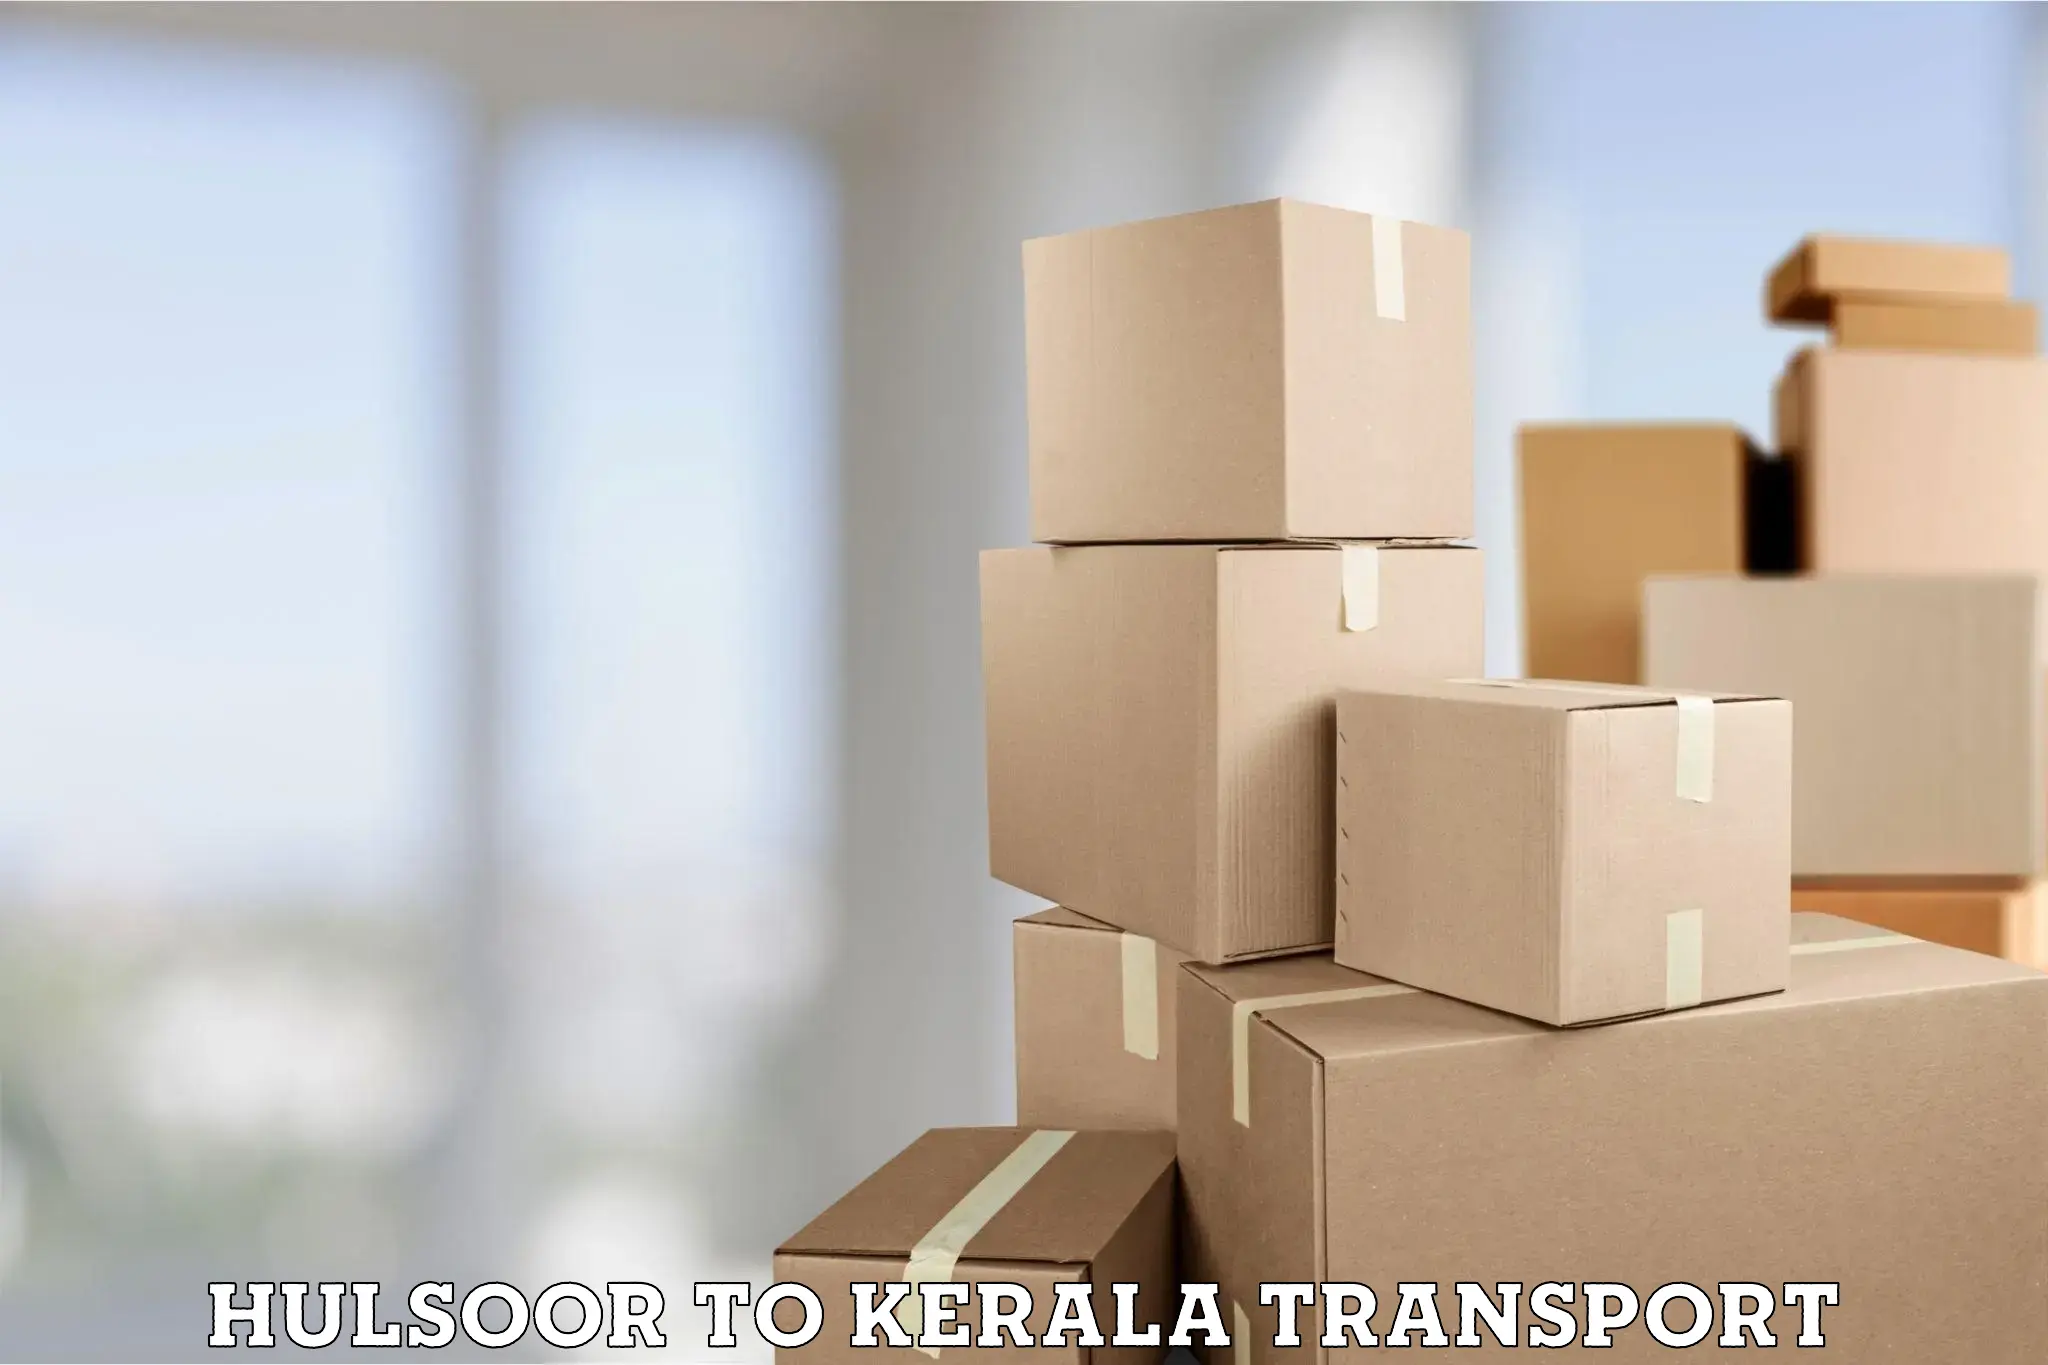 Commercial transport service Hulsoor to Parippally